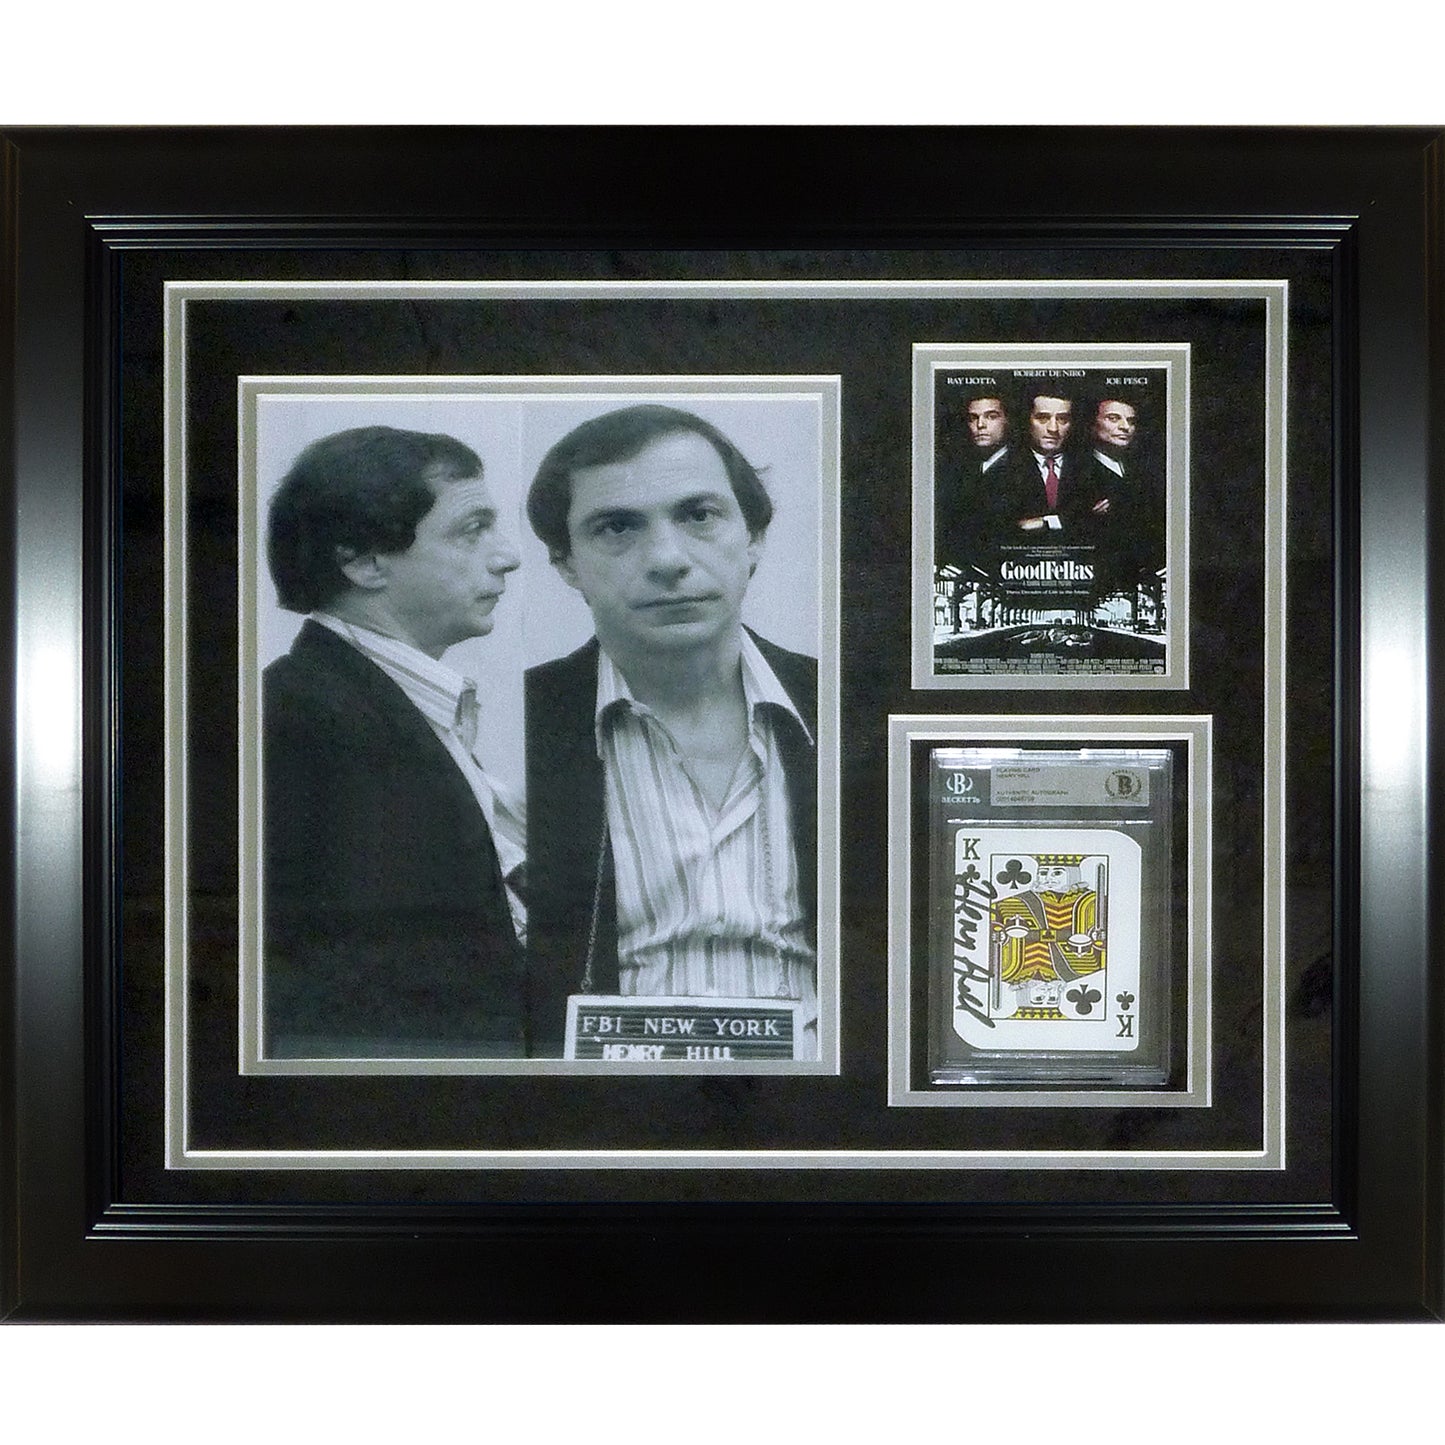 Henry Hill Autographed Playing Card Deluxe Framed Goodfellas Movie Original Mobster Piece - Beckett